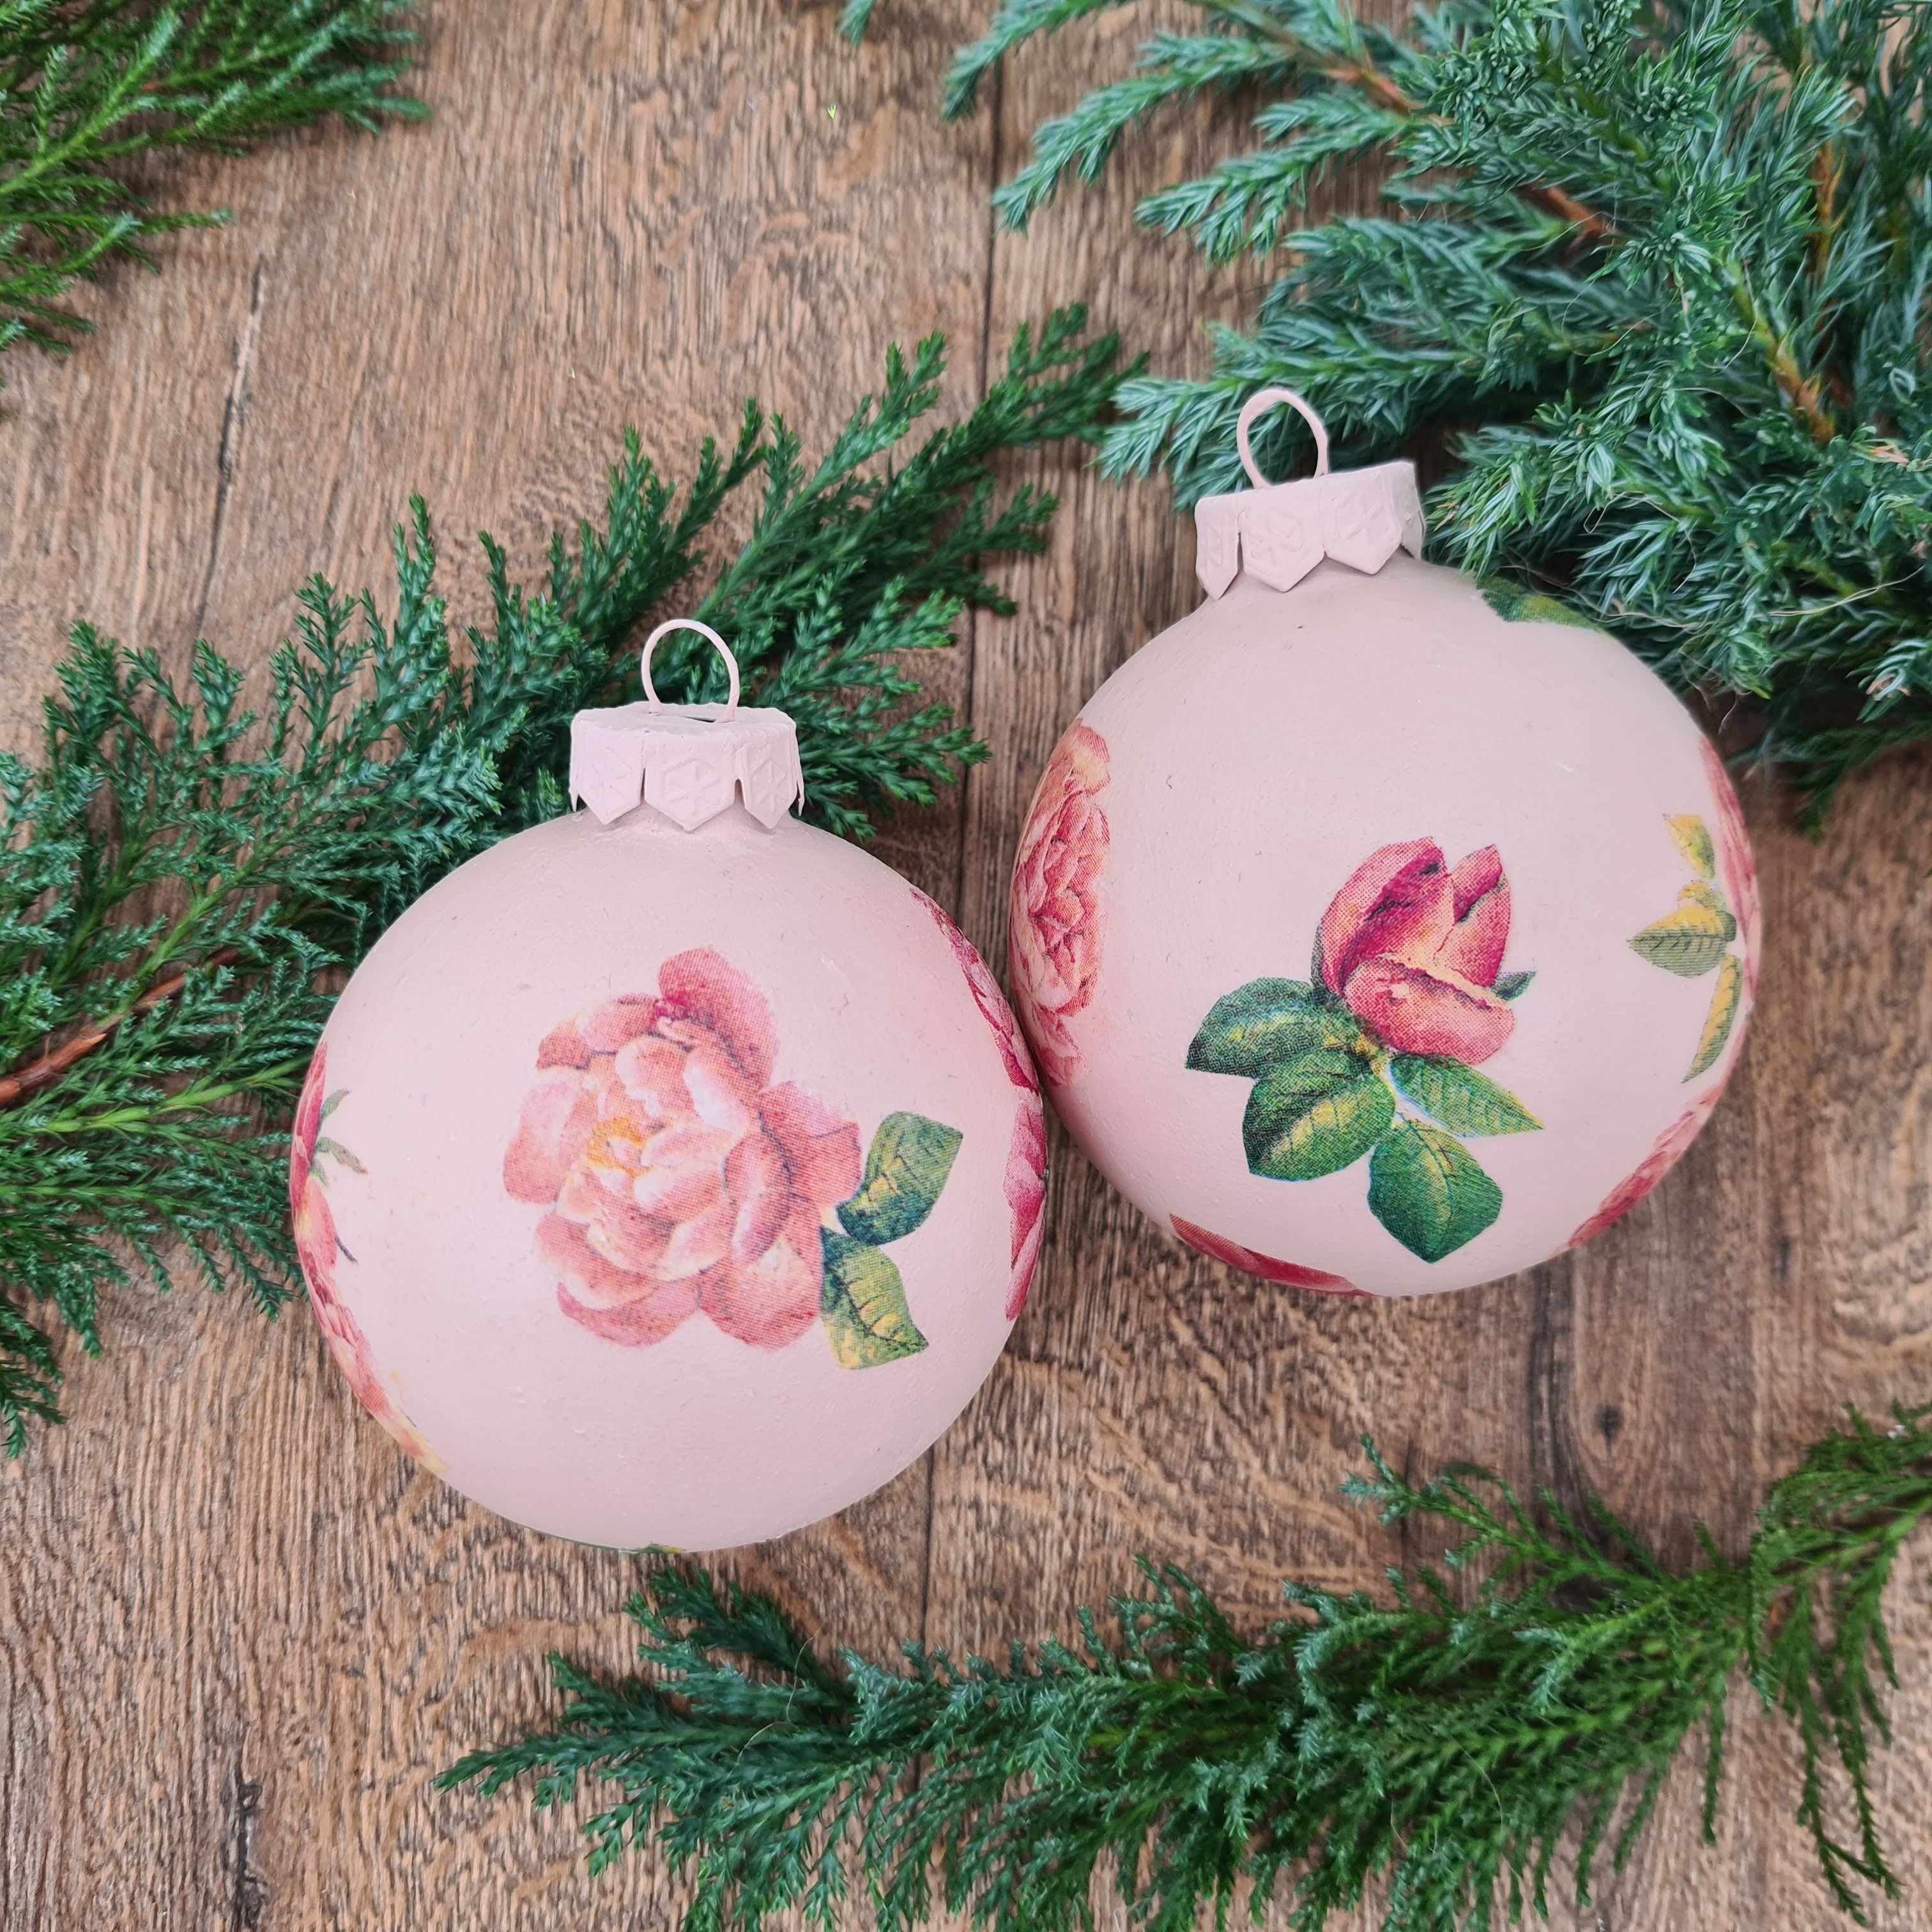 Stunning Set of 2 Handmade Christmas Balls in Blush Pink with Floral Decoupage